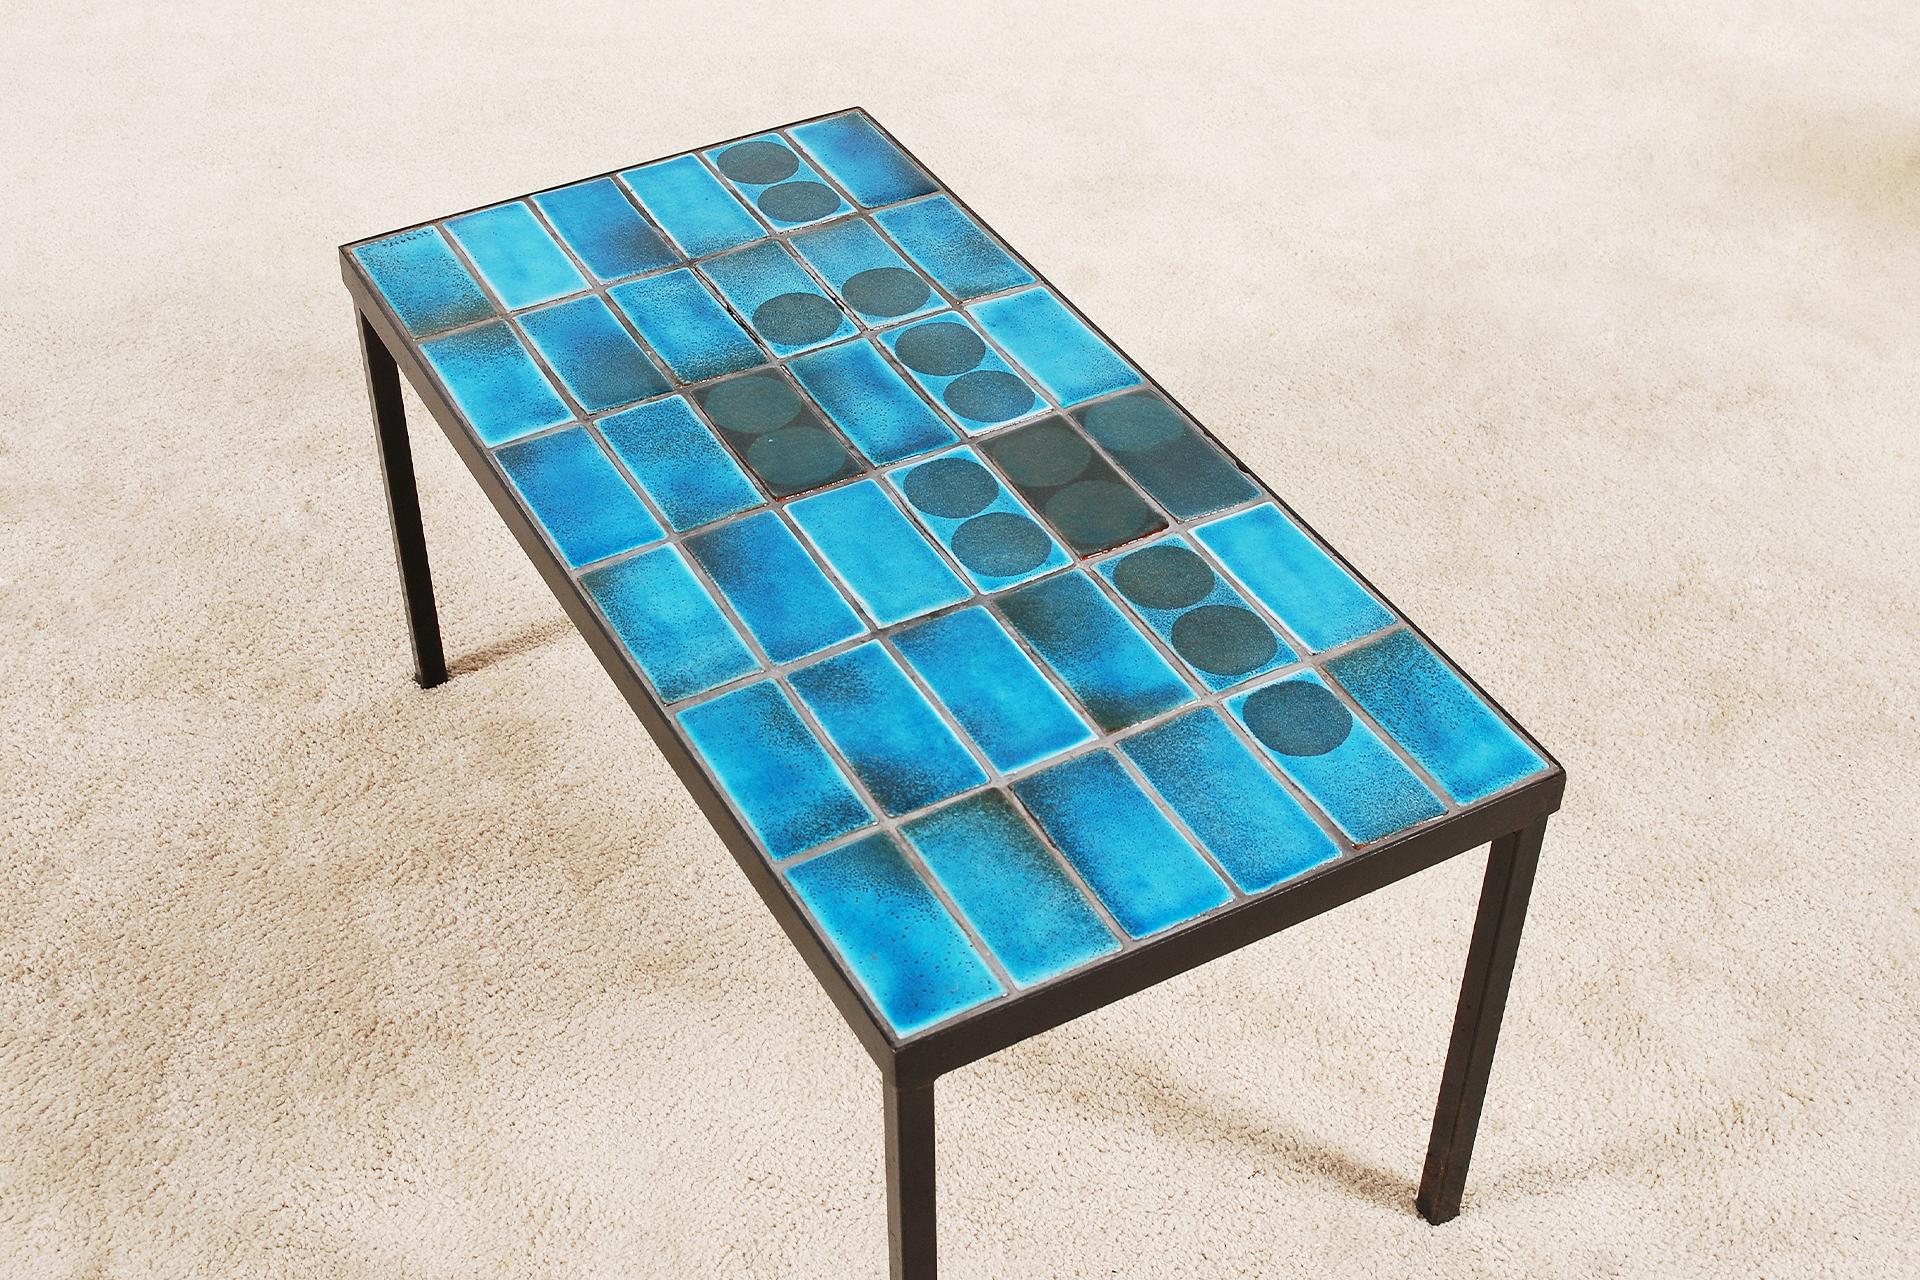 French Vallauris Coffee Table with Blue Ceramic Tiles, circa 1960